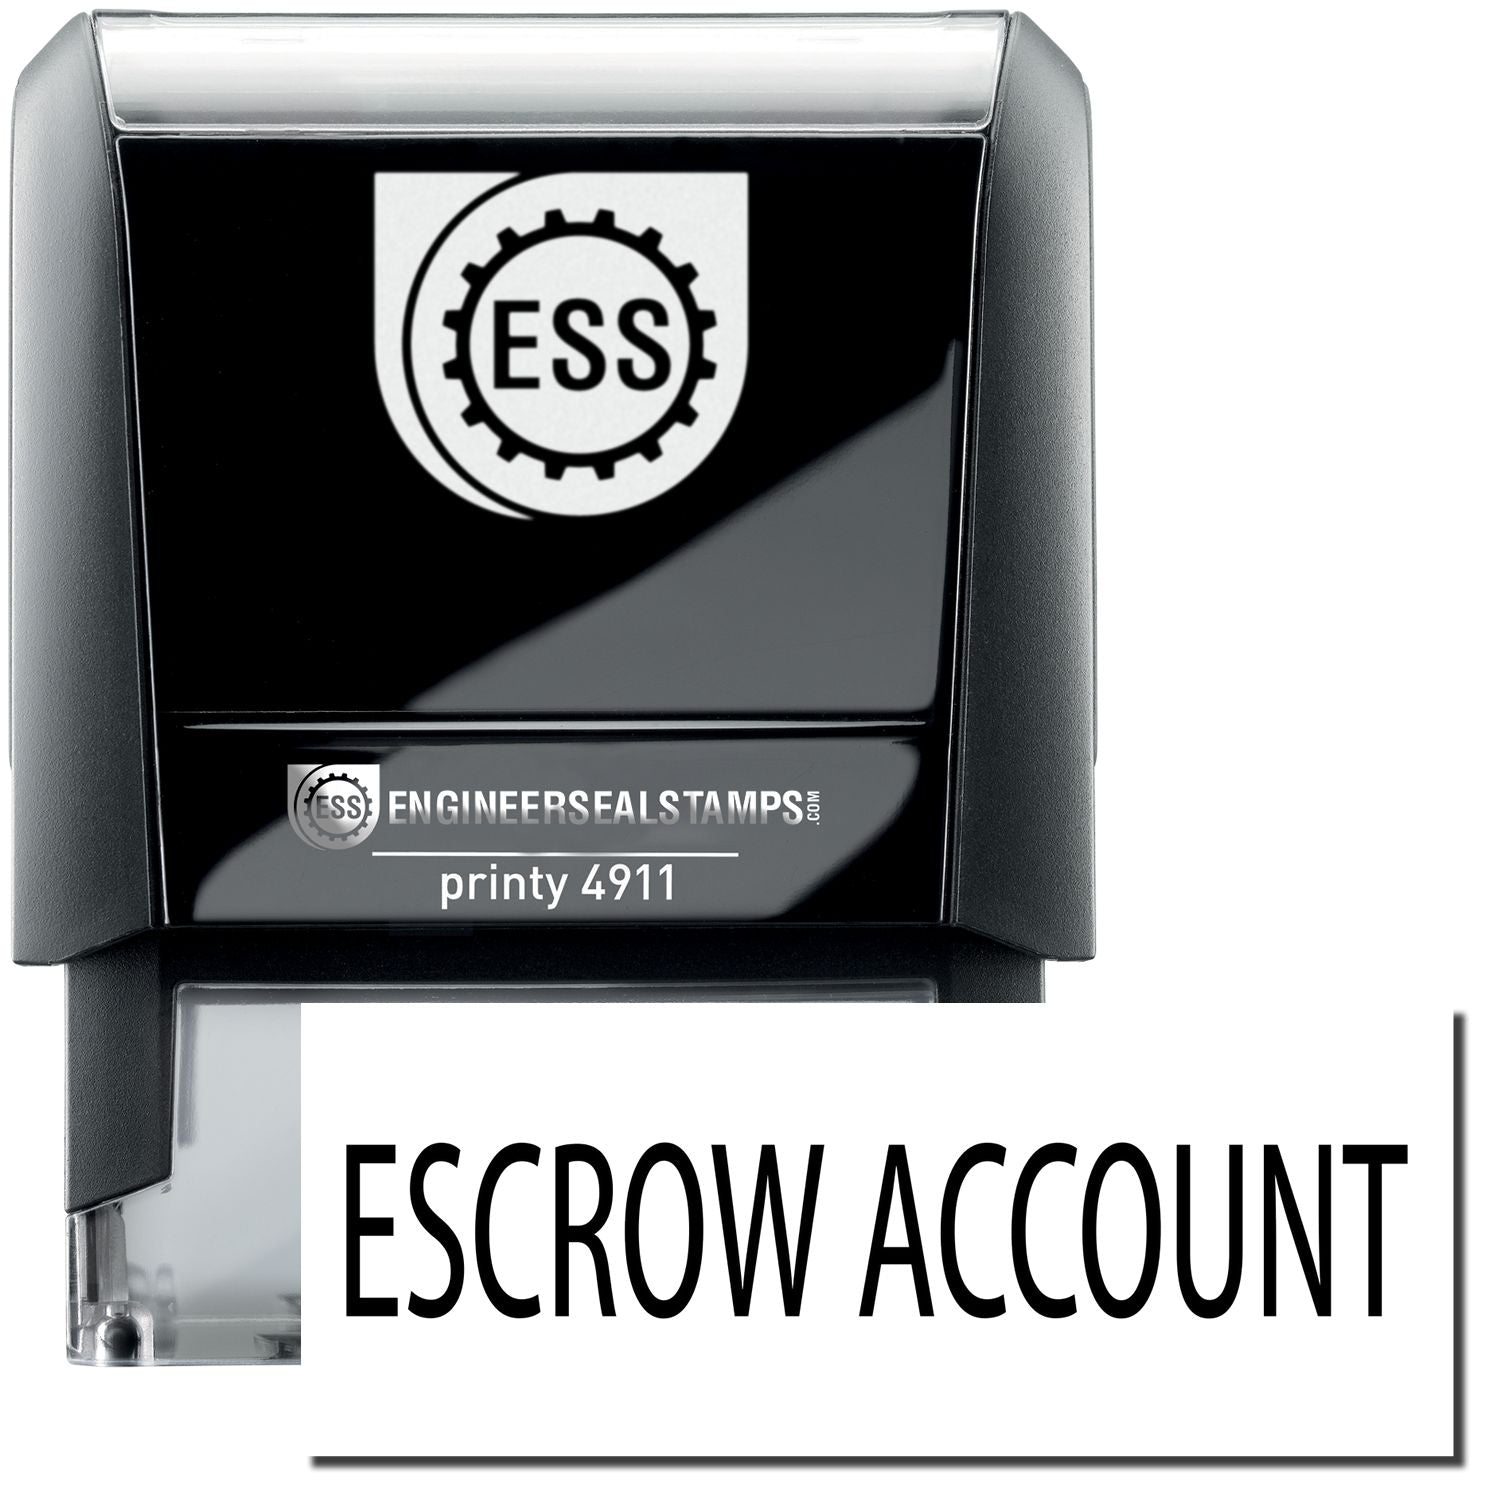 A self-inking stamp with a stamped image showing how the text "ESCROW ACCOUNT" is displayed after stamping.